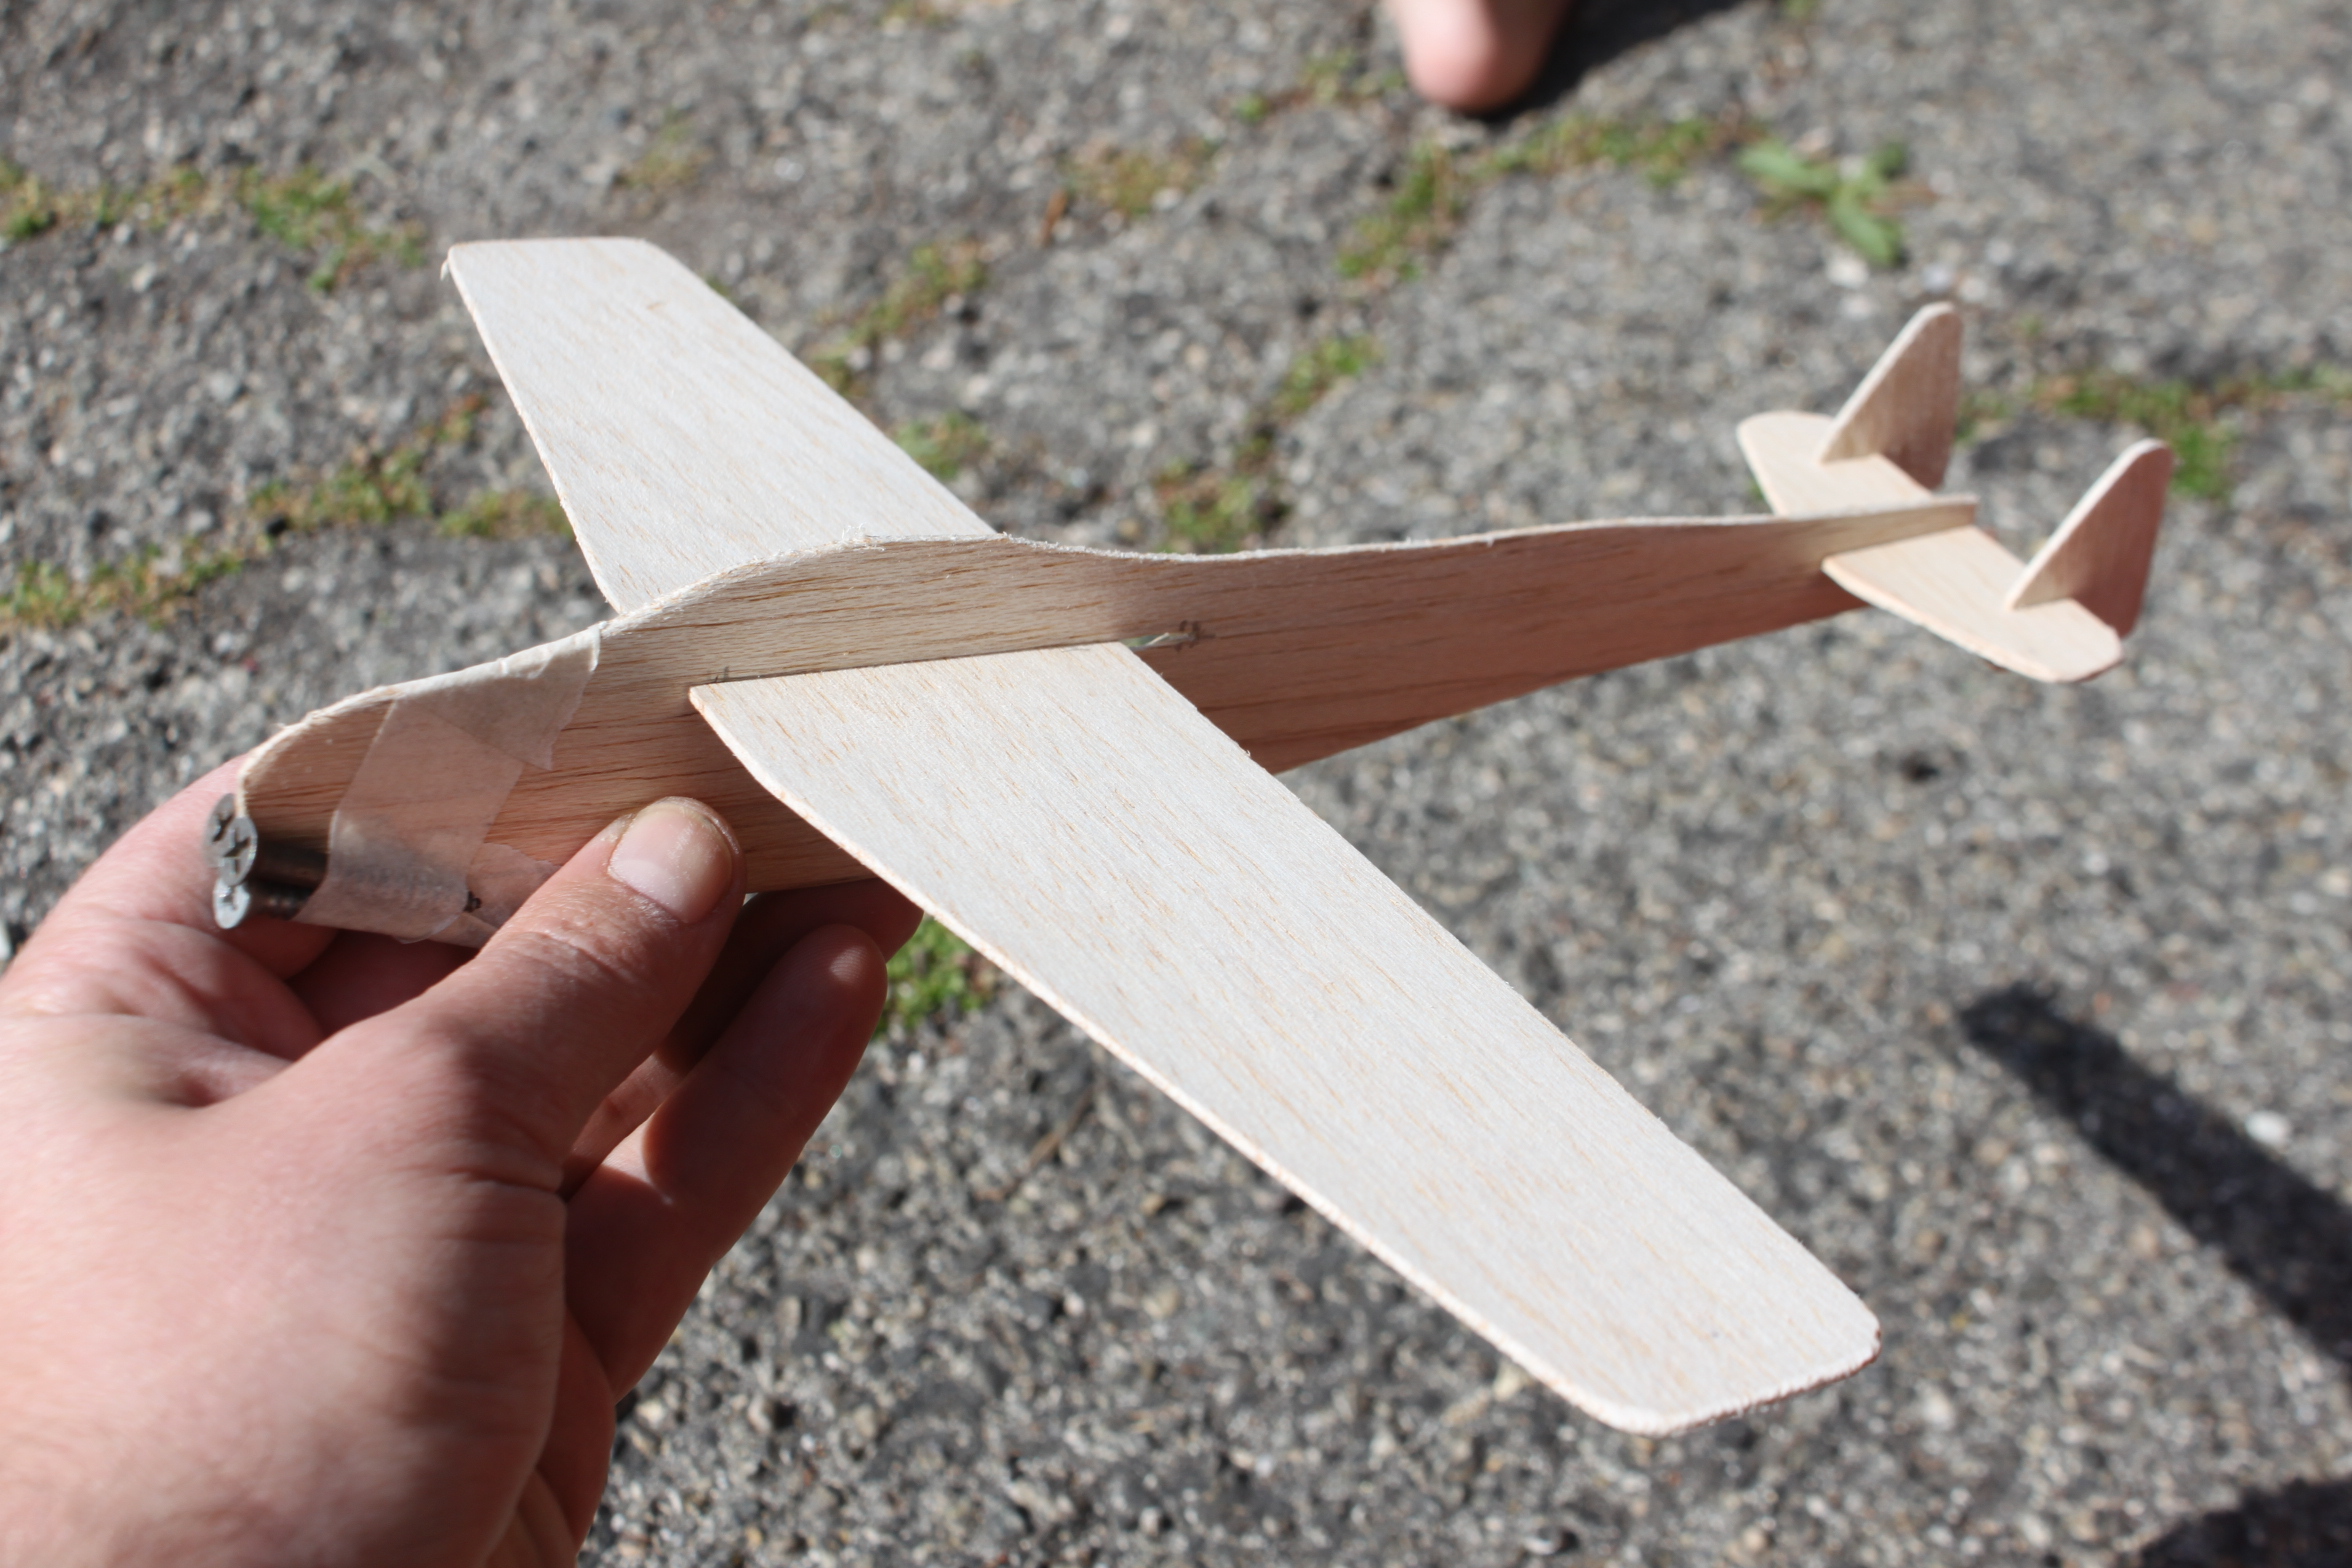 How to Build Wood Gliders How To Make PDF Plans